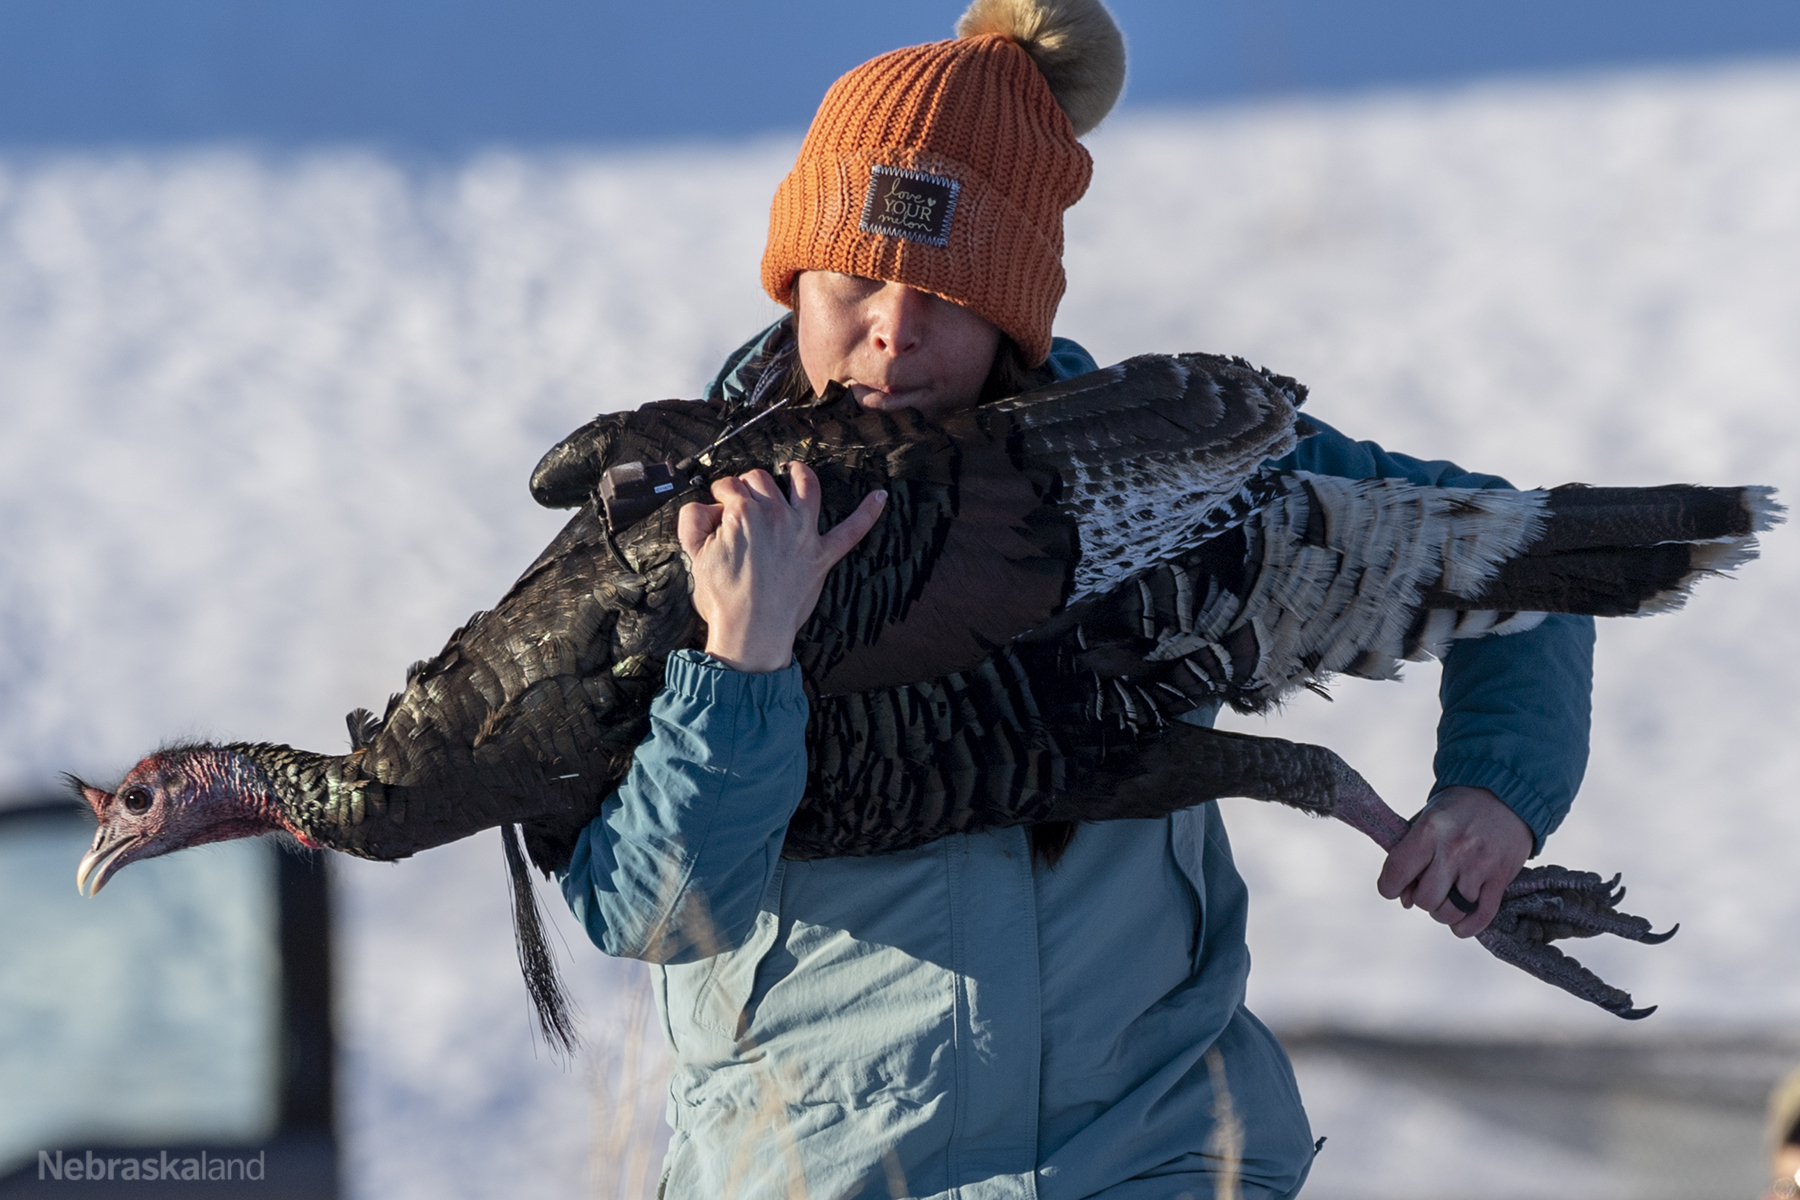 Erin Urey hold a wild turkey and walks through the snow to a safe site to release the turkey back to the wild